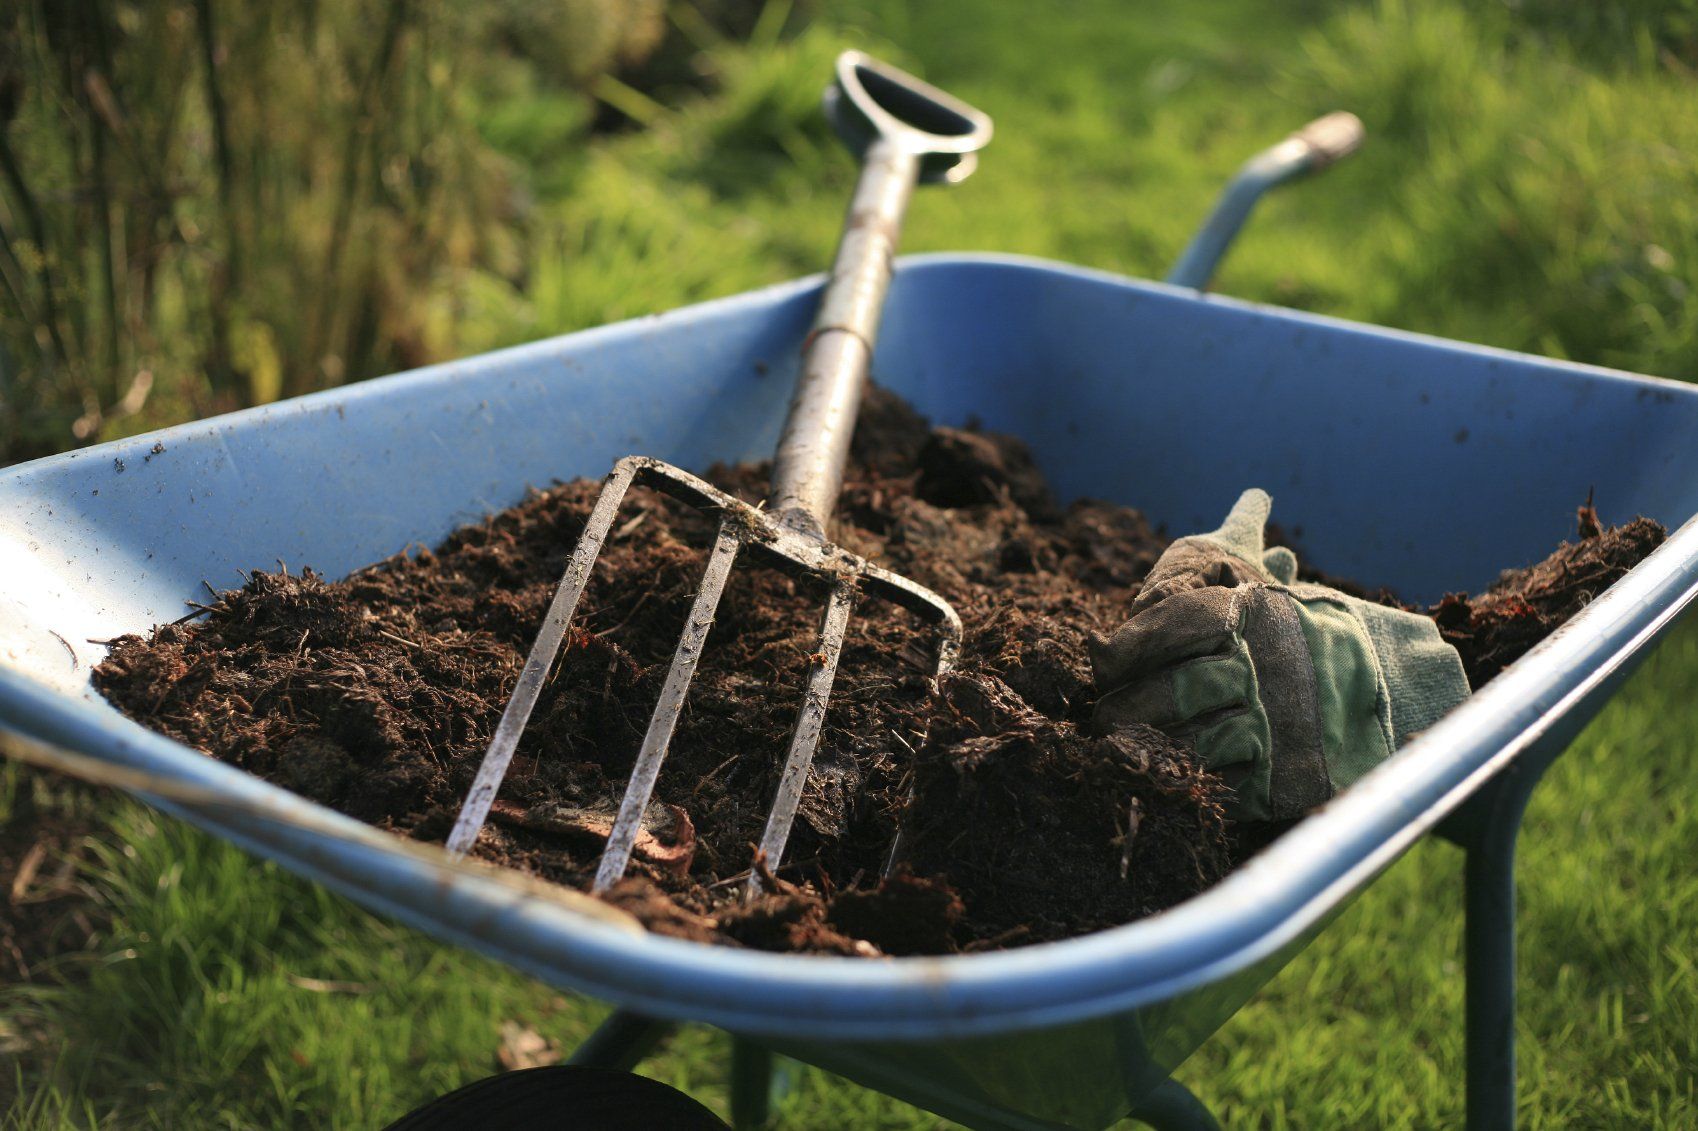 A garden fork and some potting soil sitting in a blue wheel barrow.